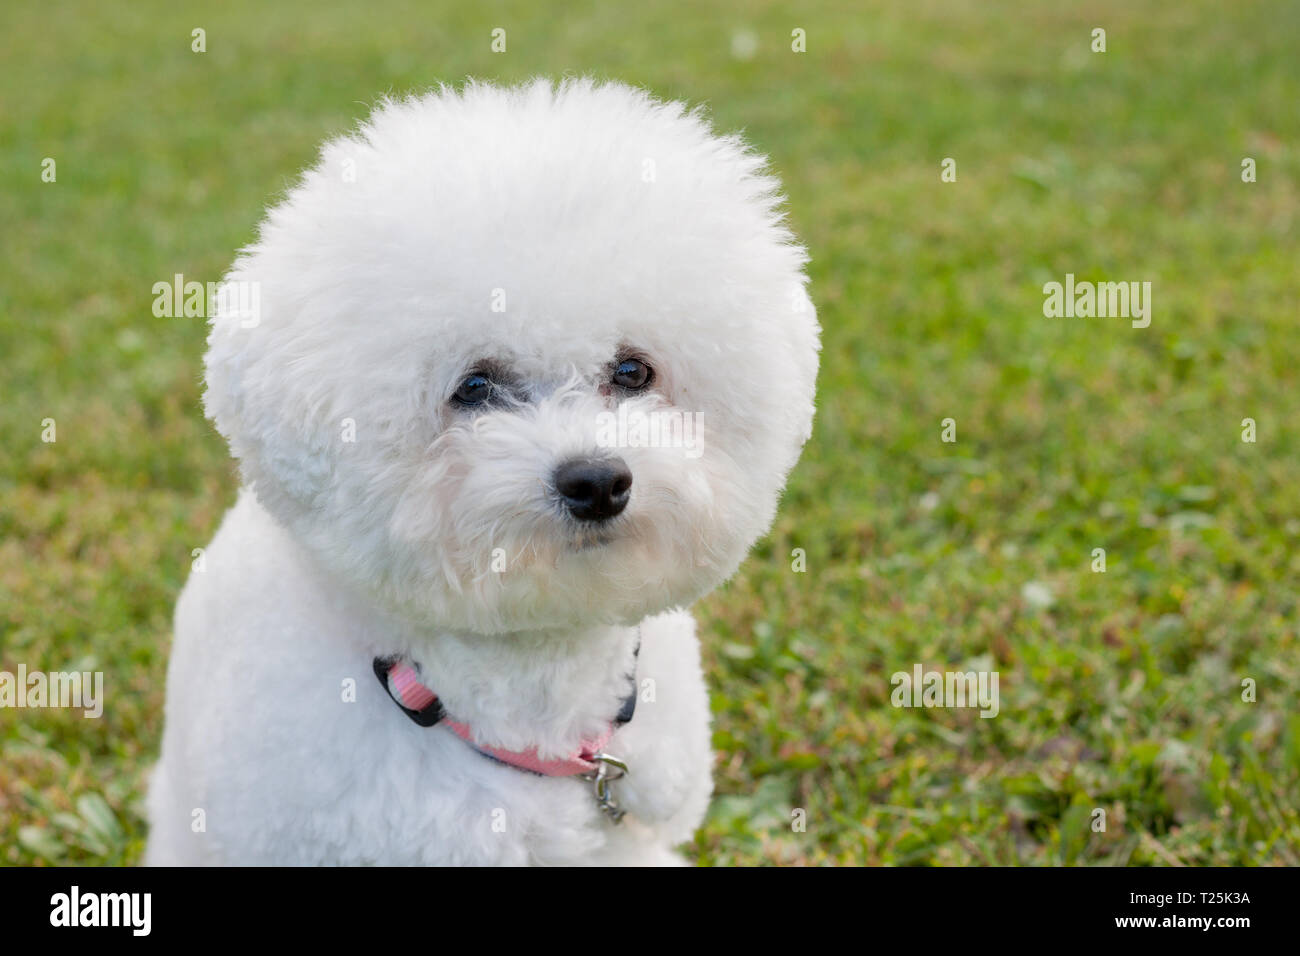 Cute bichon frise is looking at the camera. Pet animals. Purebred dog. Stock Photo